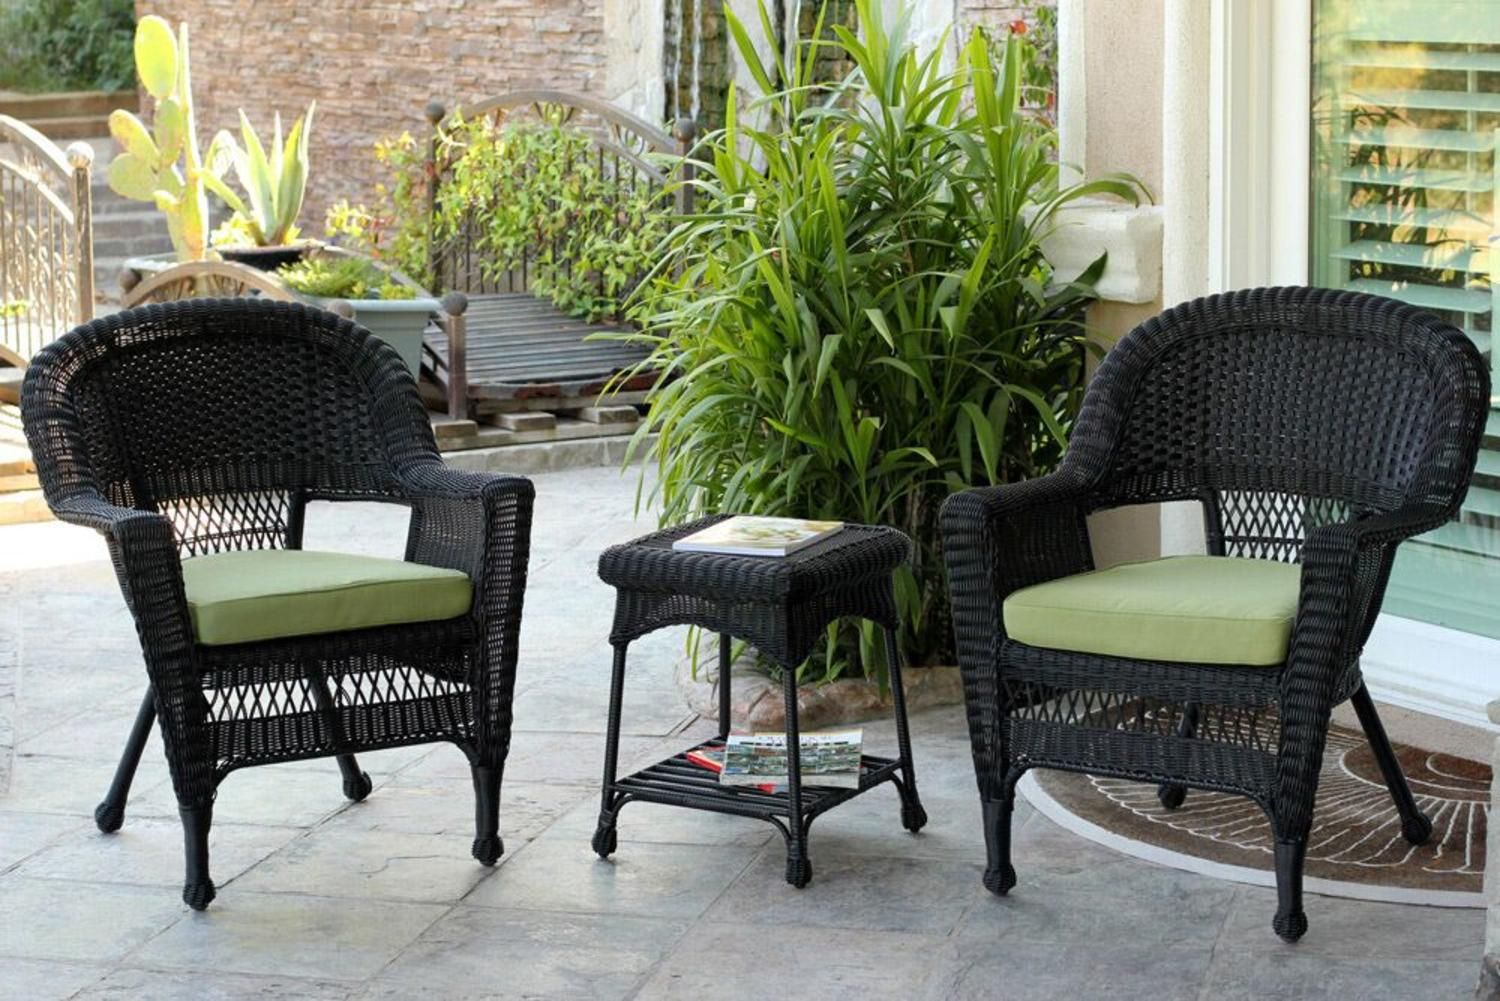 3 Piece Black Resin Wicker Patio Chairs And End Table Furniture Set Intended For White 3 Piece Outdoor Seating Patio Sets (View 9 of 15)